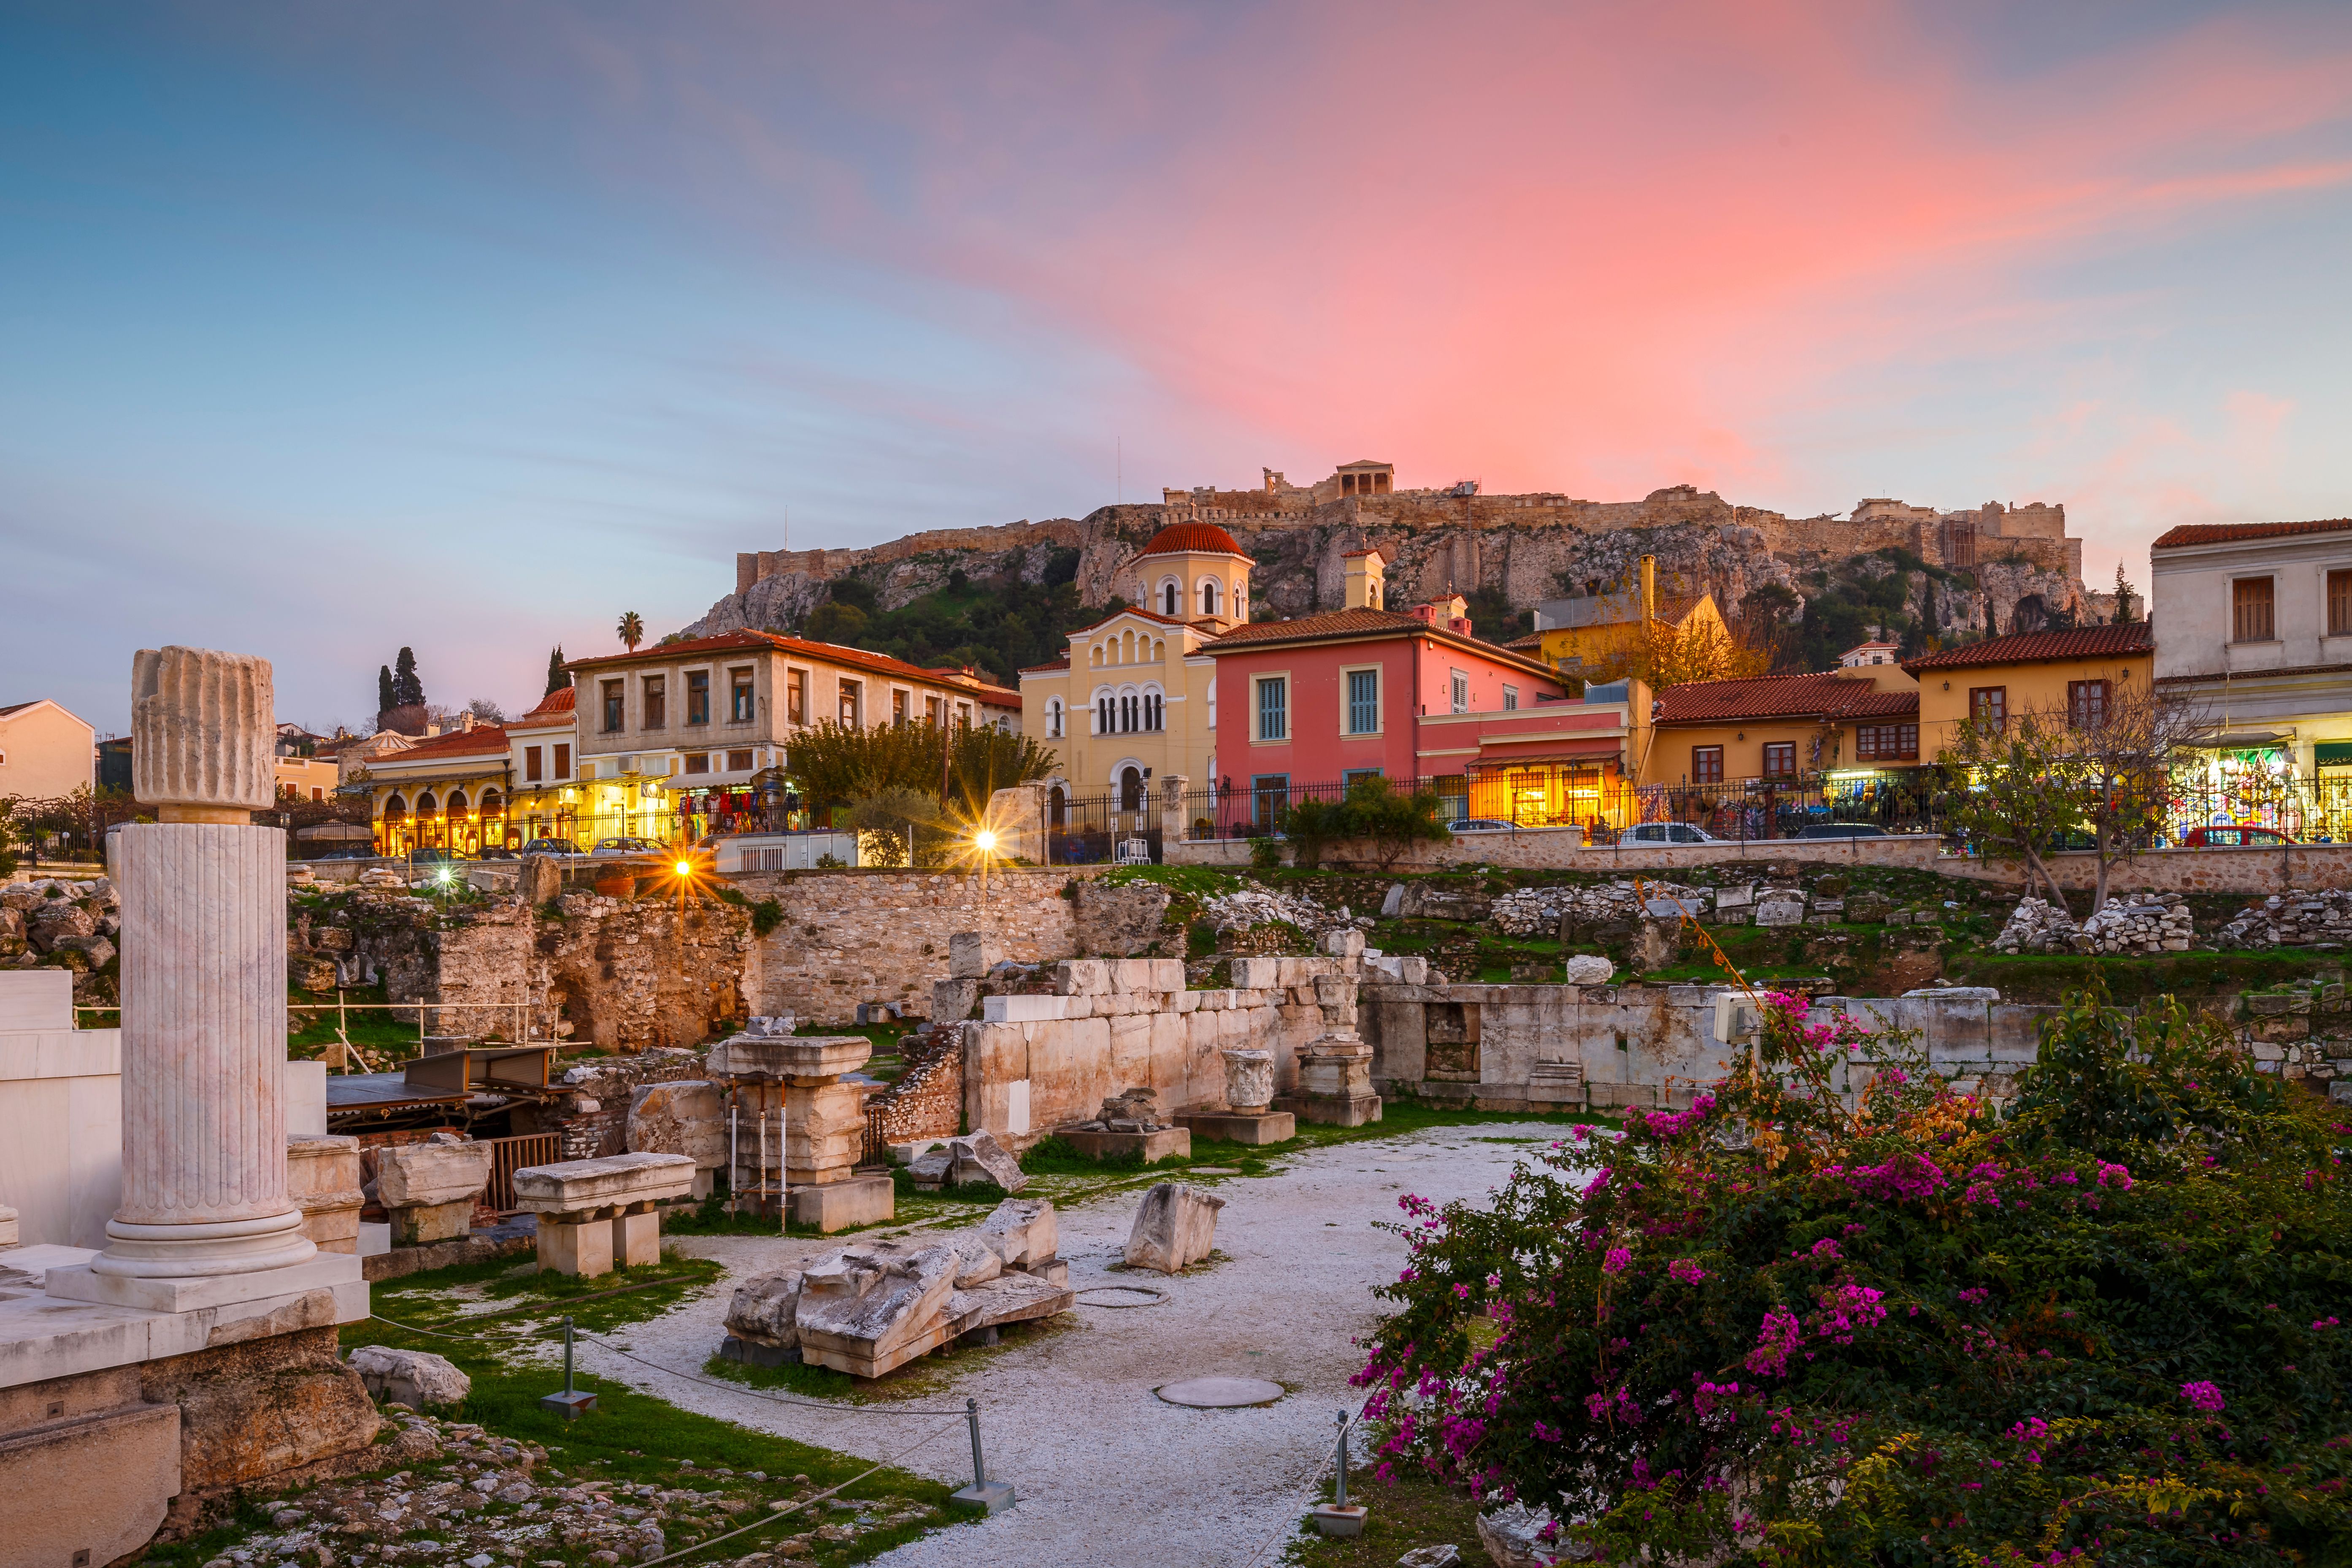 Athens - Europe’s Leading Cultural City Destination 2023 -  Plaka oldest city in Athens - ratepunk